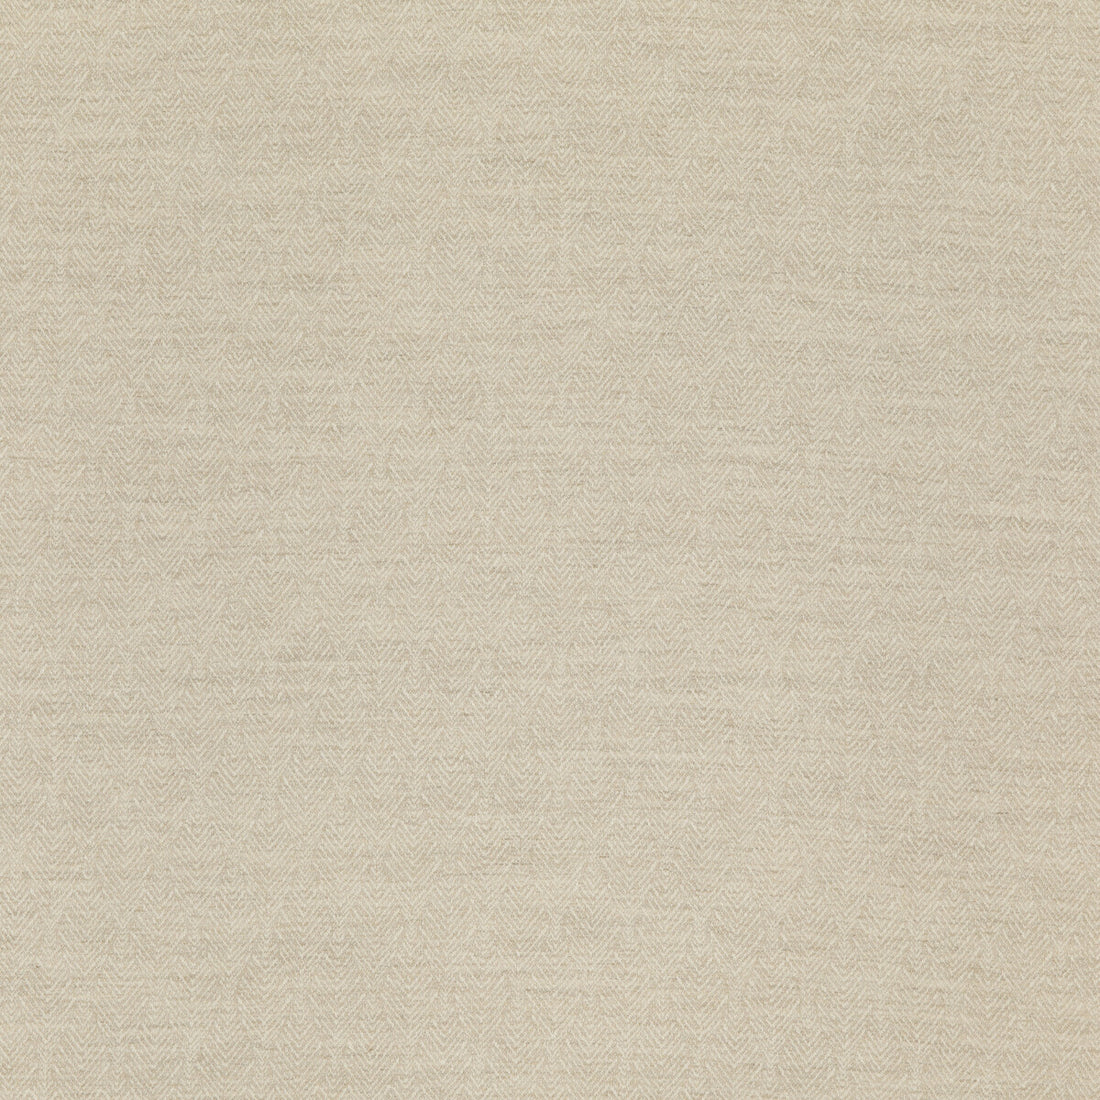 Capo fabric in taupe color - pattern ED85298.210.0 - by Threads in the Luxury Weaves collection